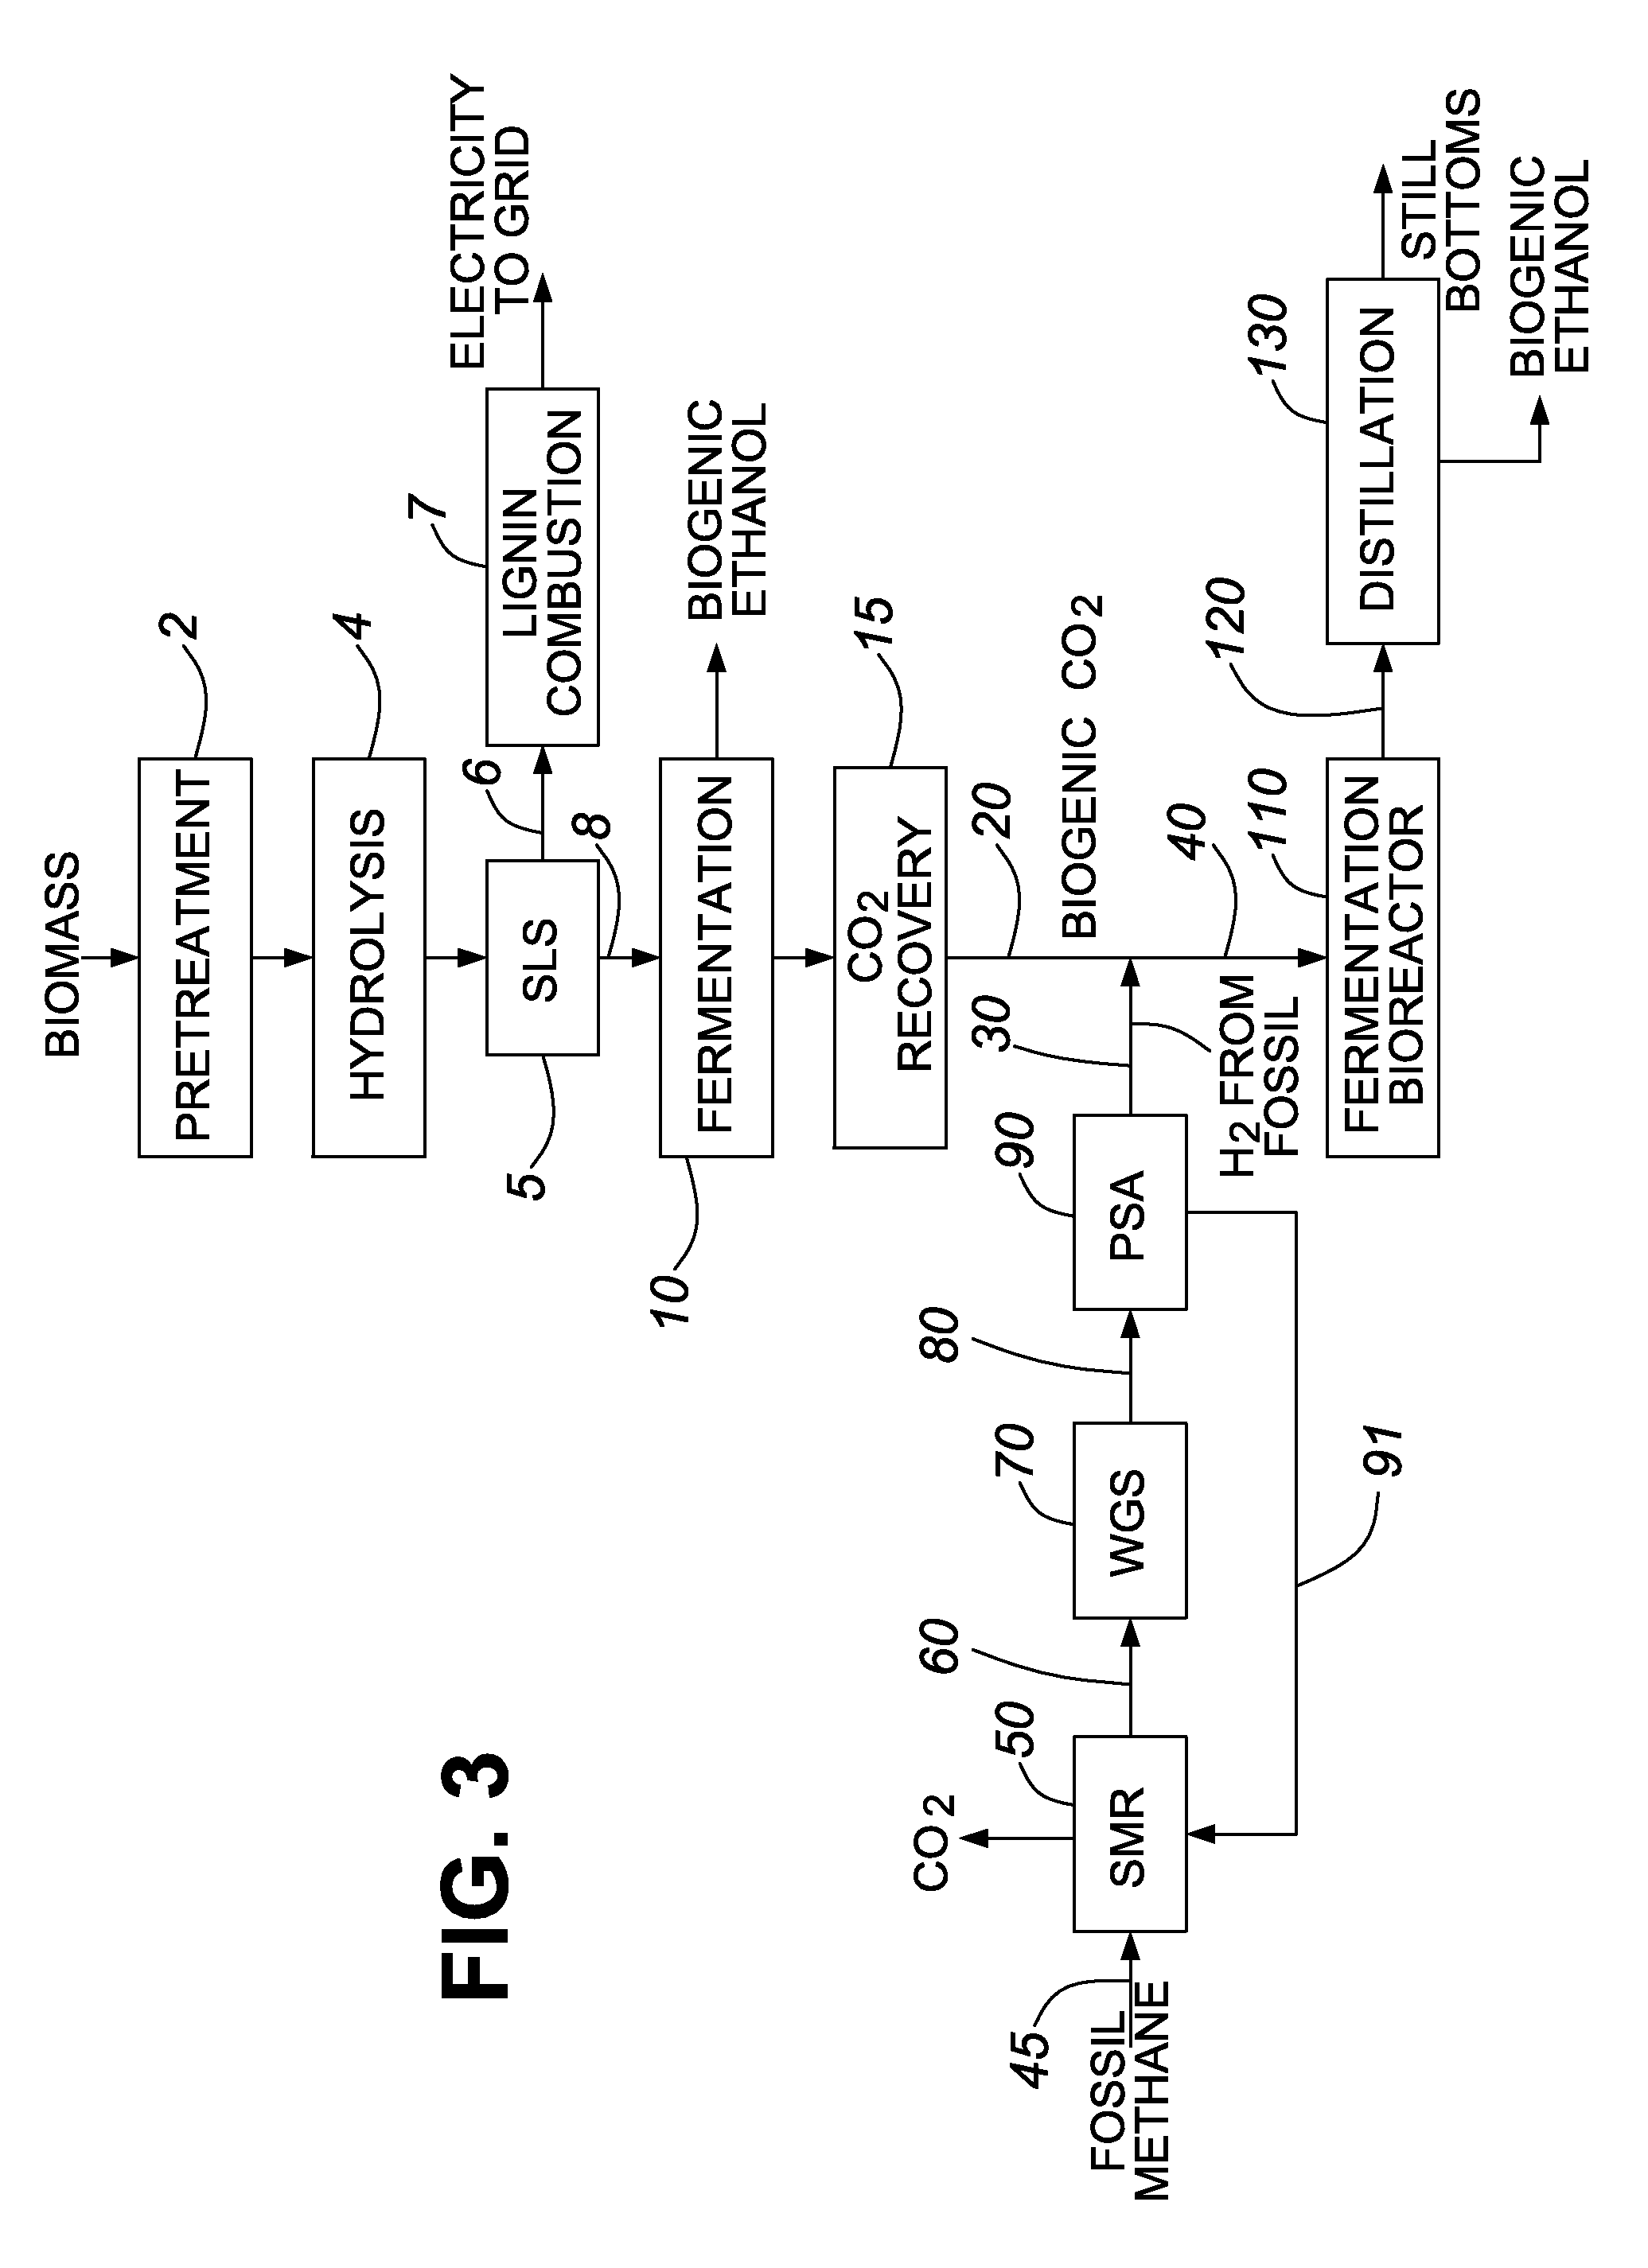 Process for using biogenic carbon dioxide derived from non-fossil organic material